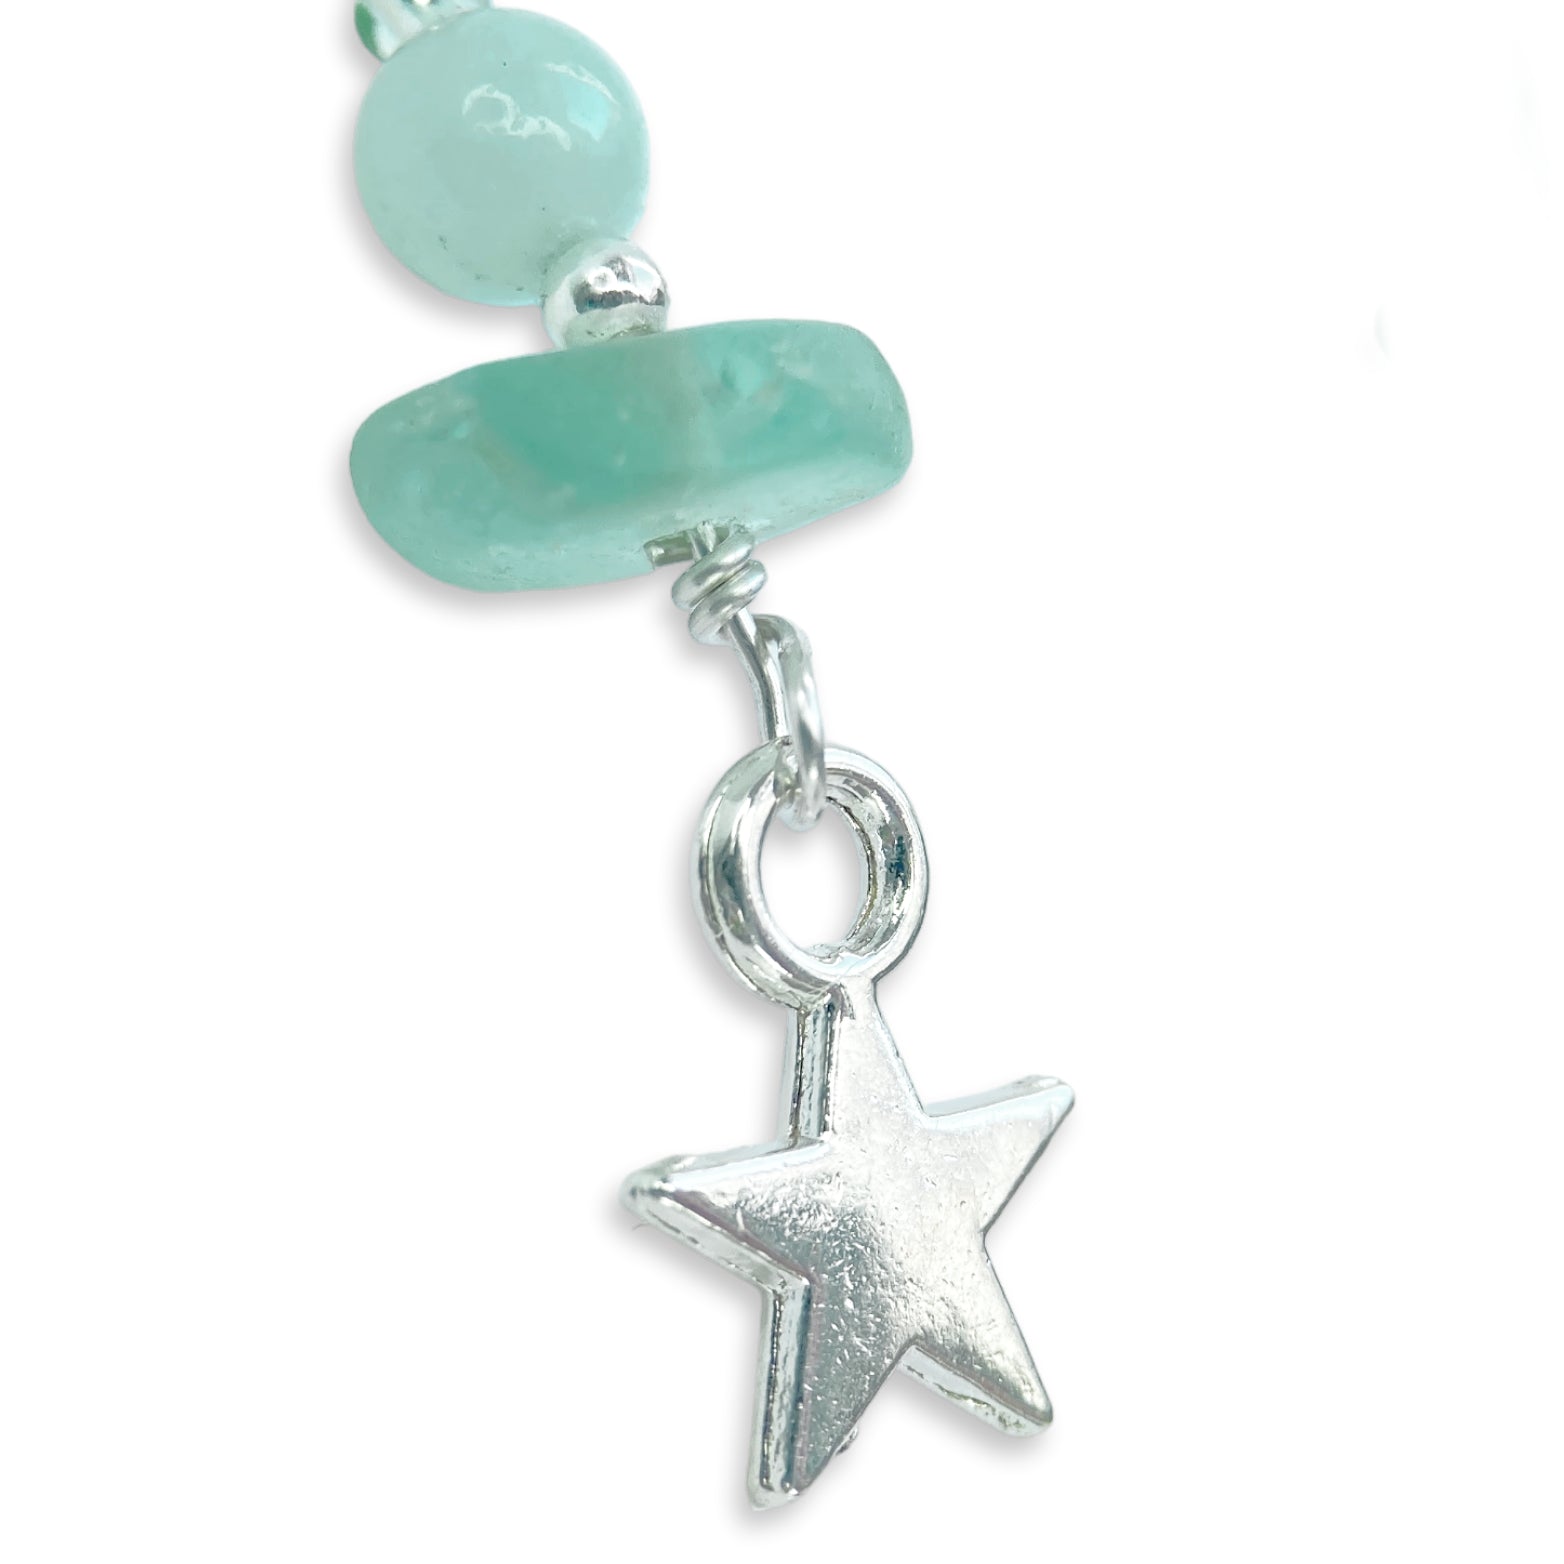 Star Earrings - Green Sea Glass & Silver Jewellery with Amazonite Crystal Beads - East Neuk Beach Crafts